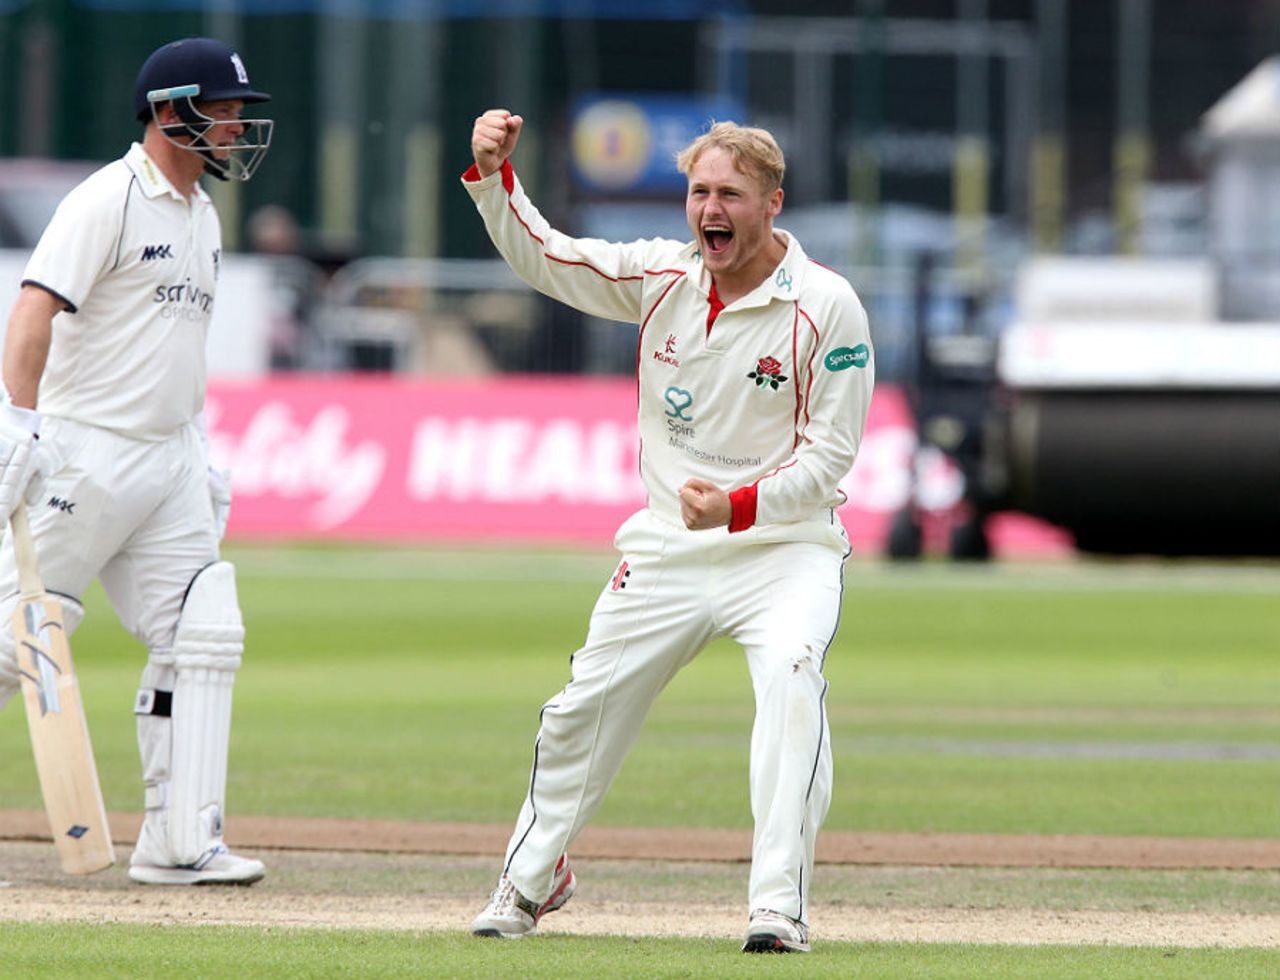 Matt Parkinson celebrates another wicket for Lancashire, Lancashire v Warwickshire, Specsavers County Championship Division One, Old Trafford, 3rd day, June 22, 2016